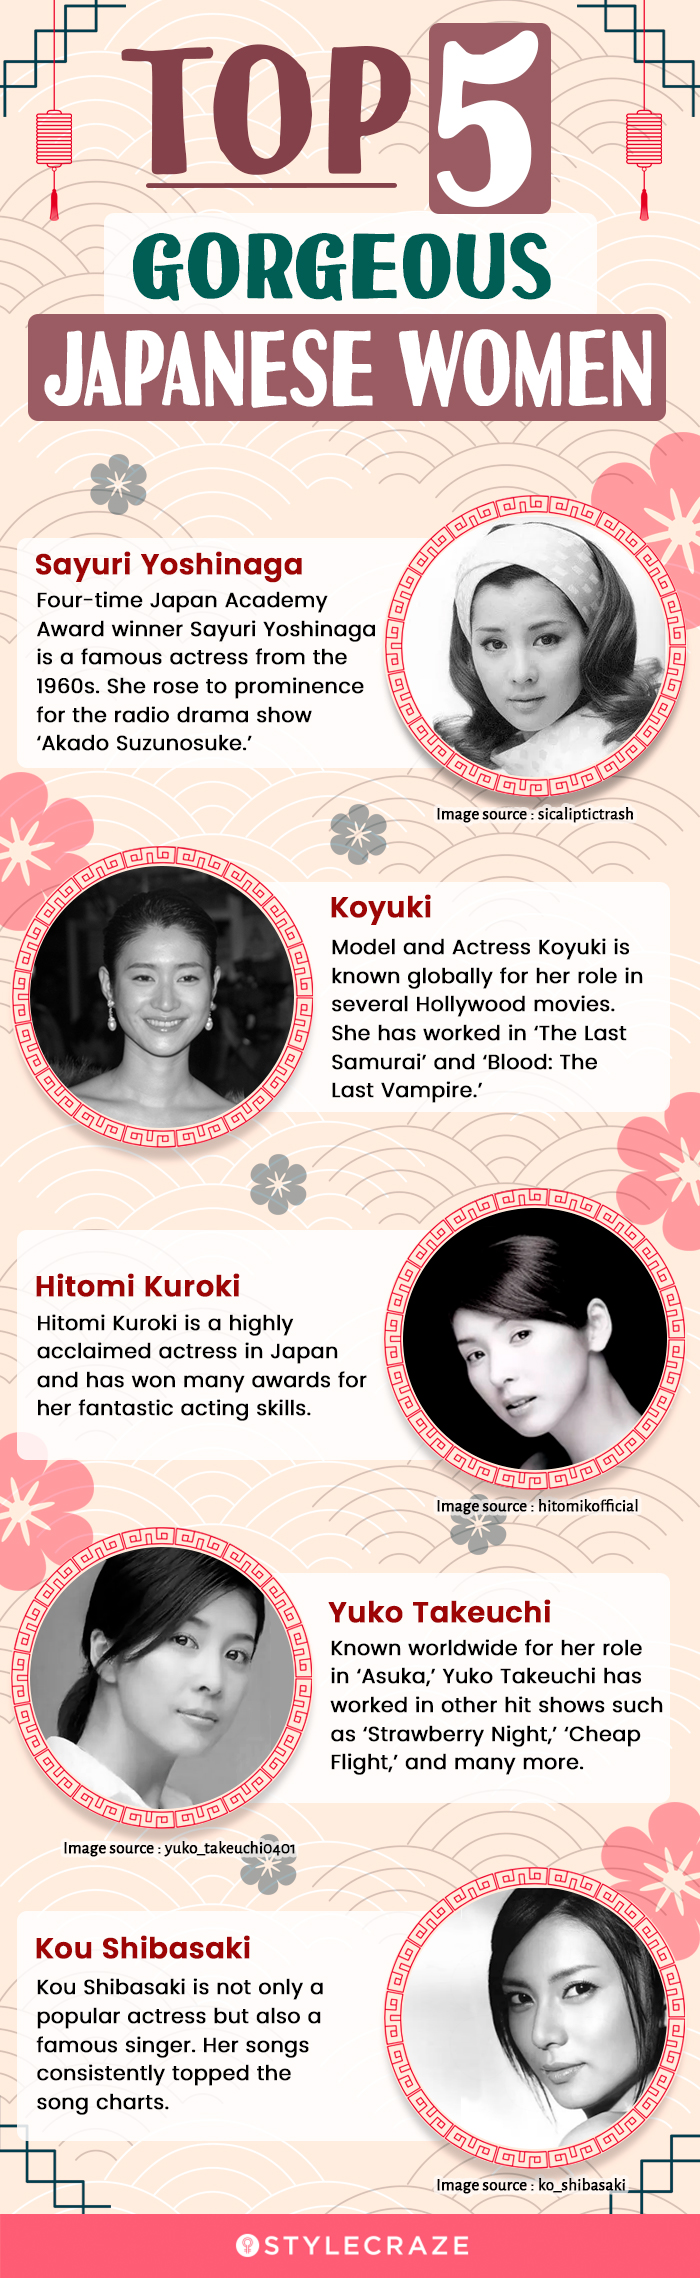 top 5 gorgeous japanese women [infographic]